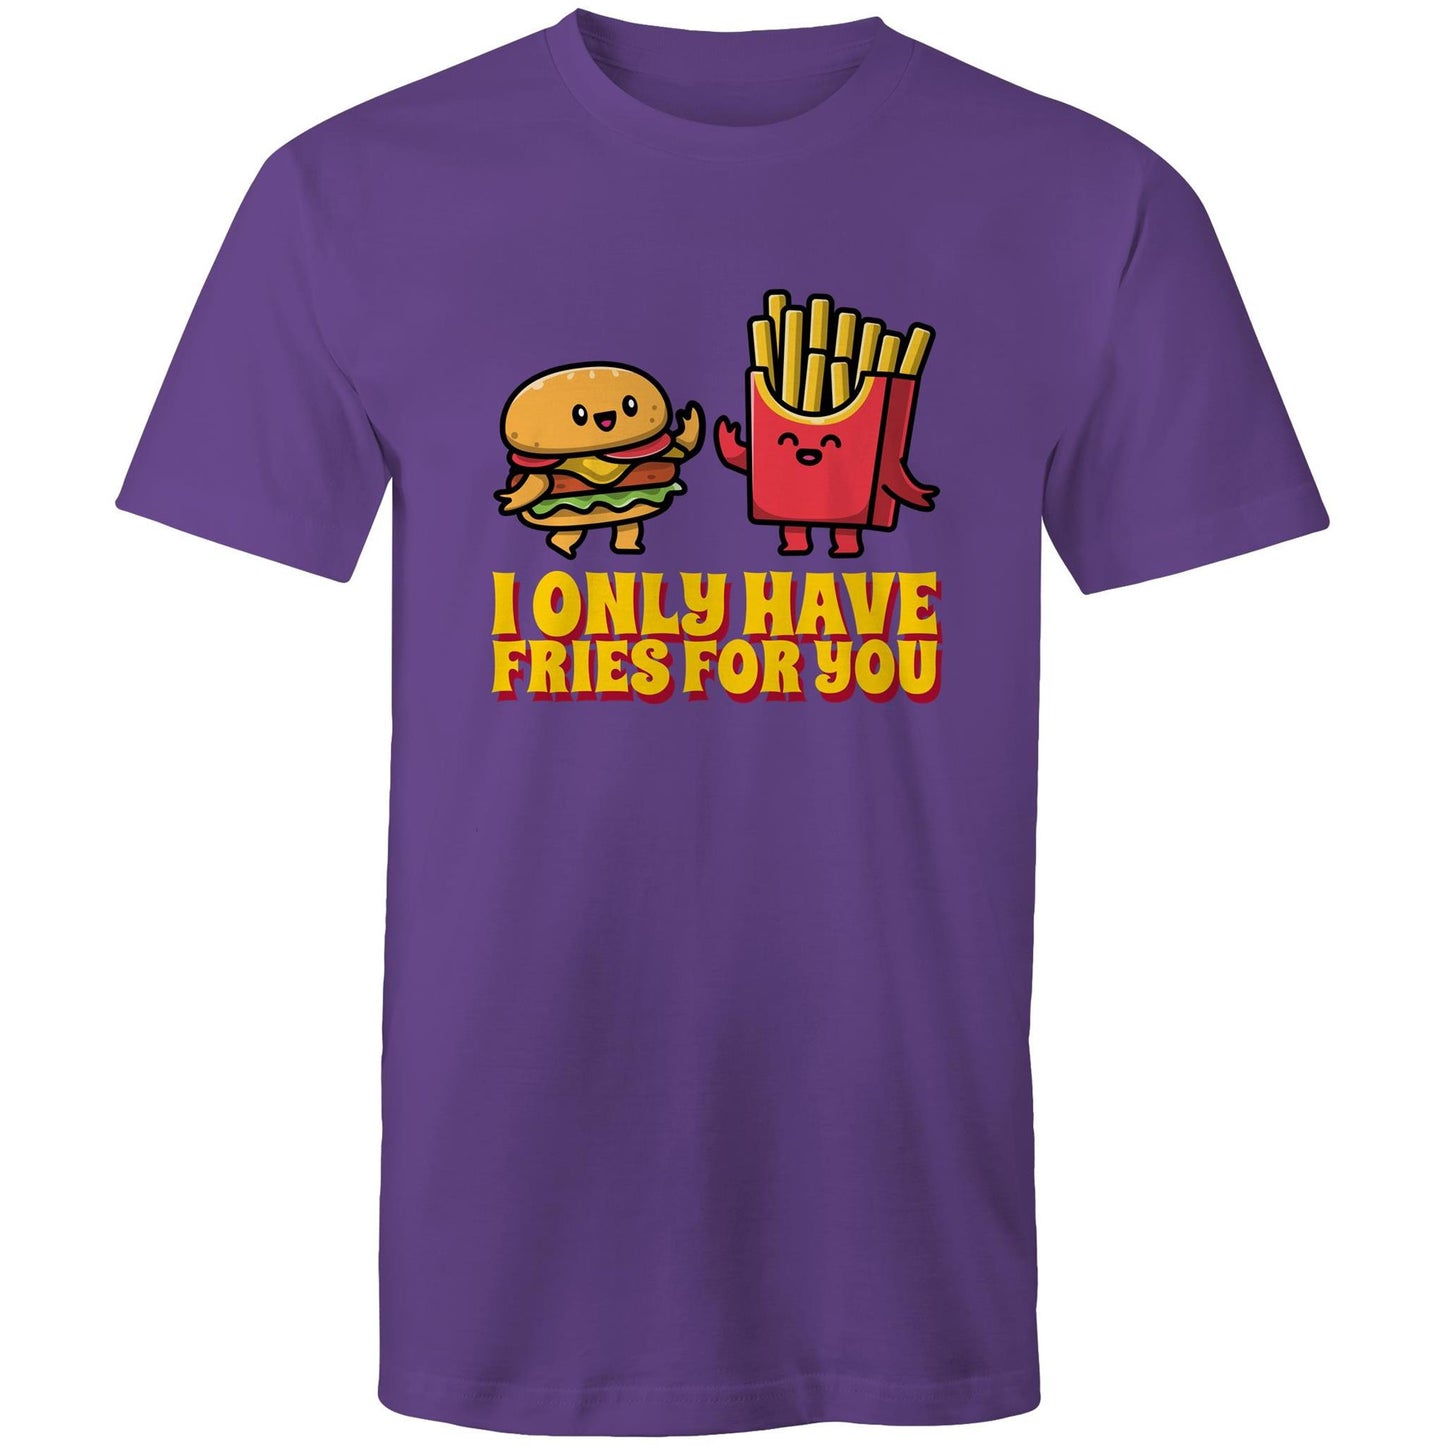 I Only Have Fries For You, Burger And Fries - Mens T-Shirt Purple Mens T-shirt